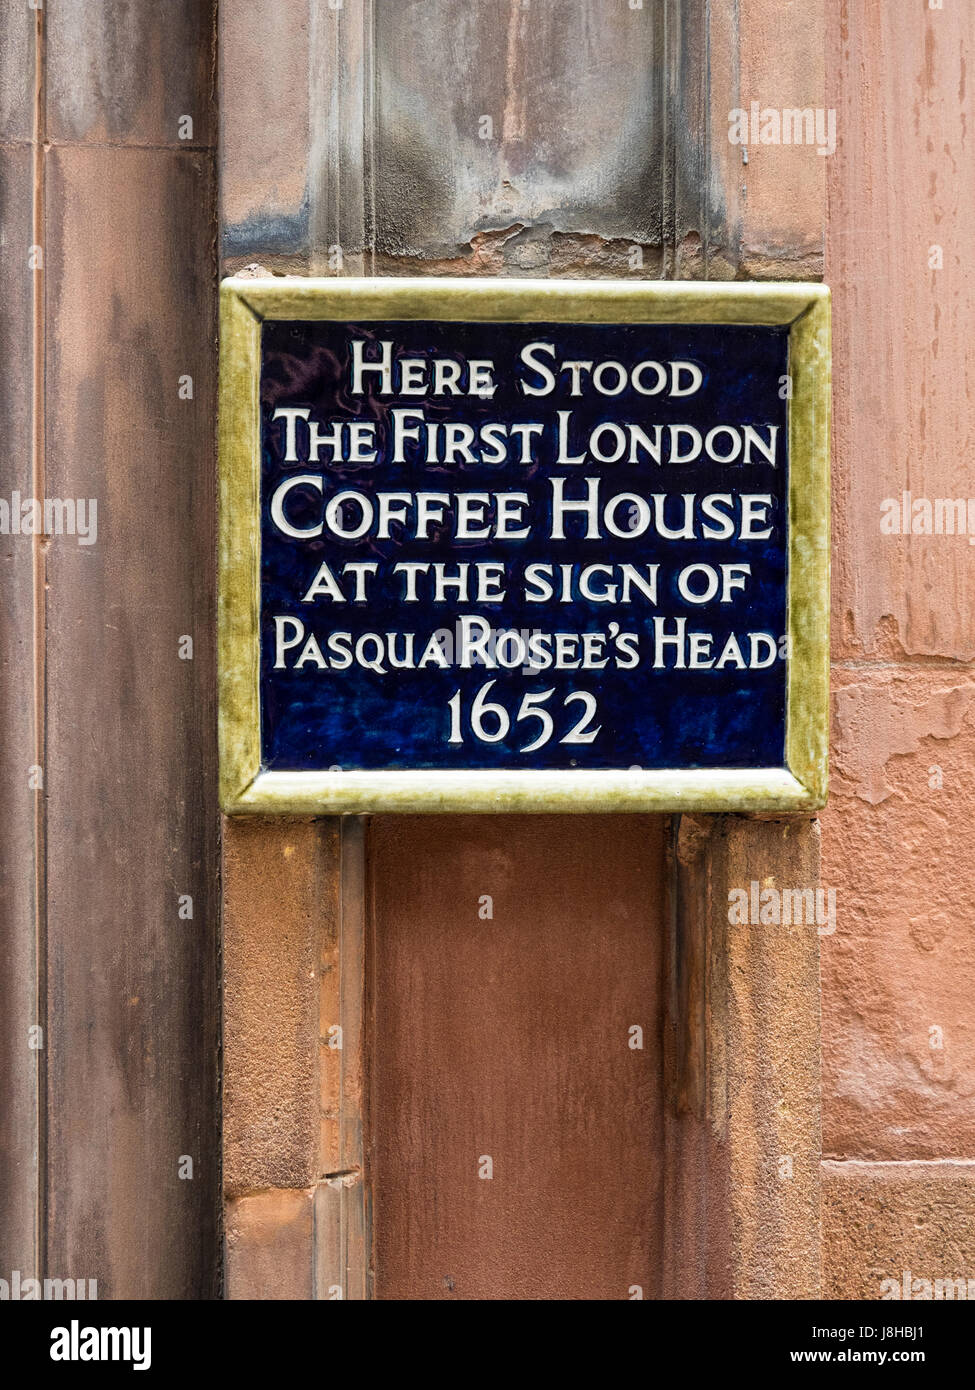 The Jamaica Wine House in St Michael's Alley off Cornhill in the City of London, on the site of London's first coffee house. Pasqua Rosee's Head. Stock Photo